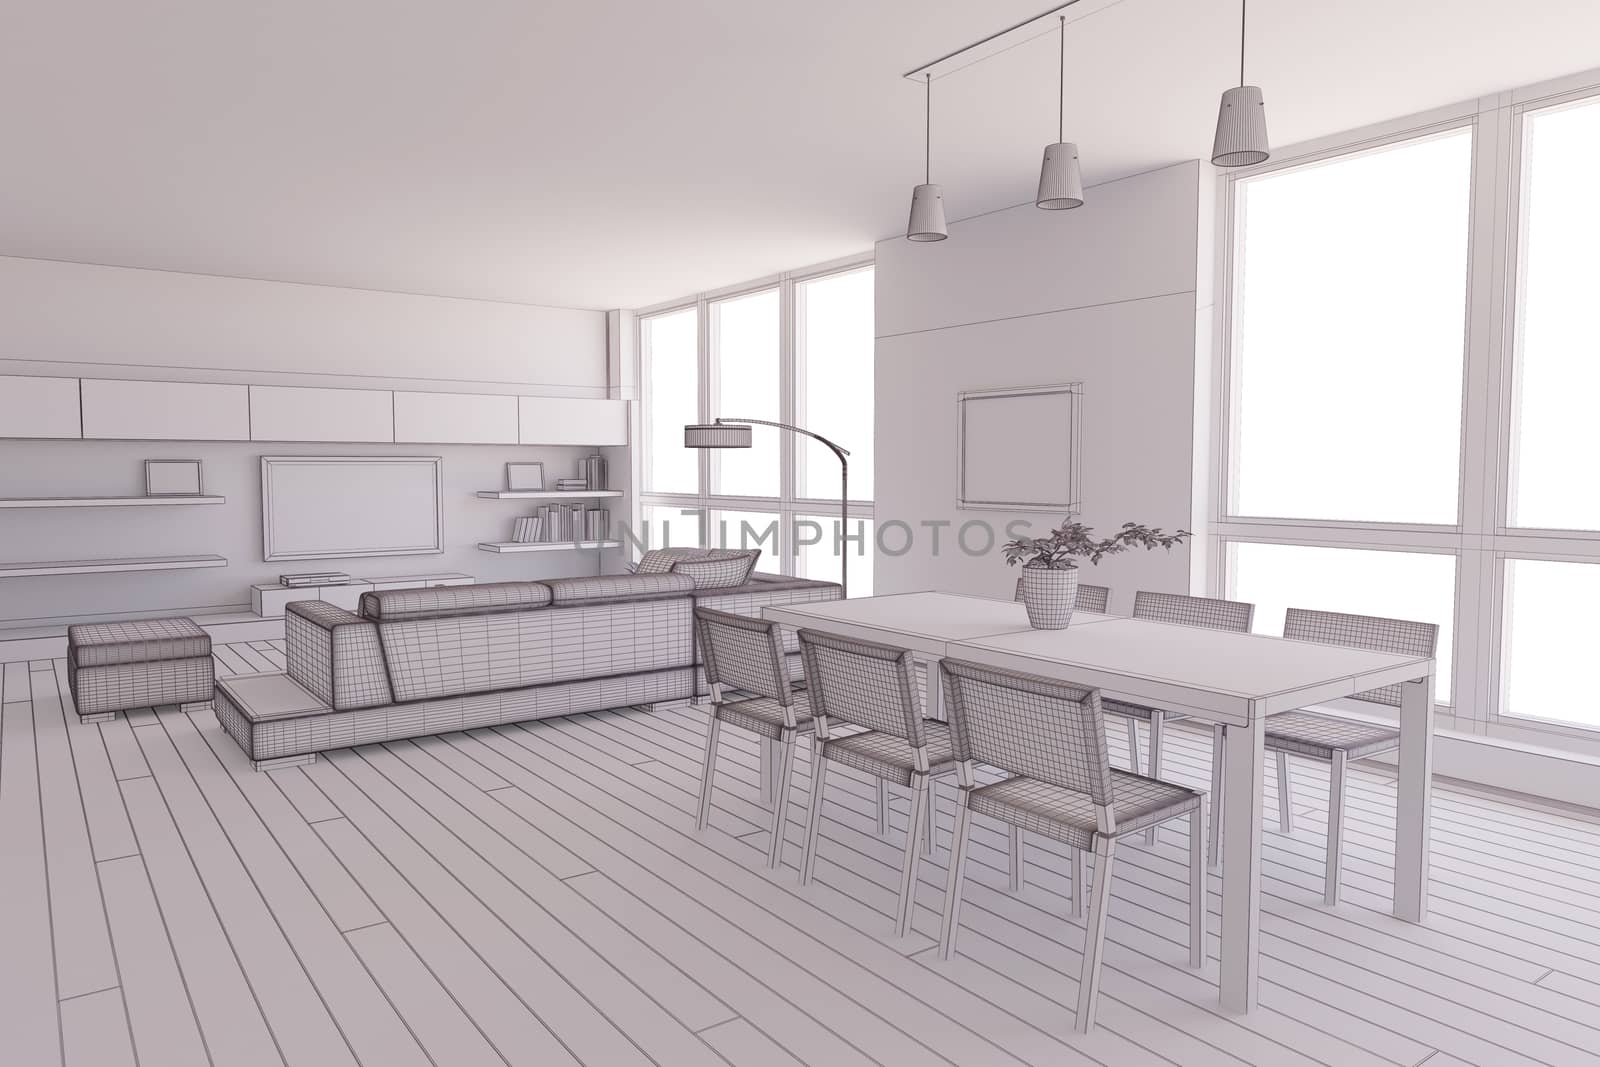 Interior render of a dining room without materials by enrico.lapponi